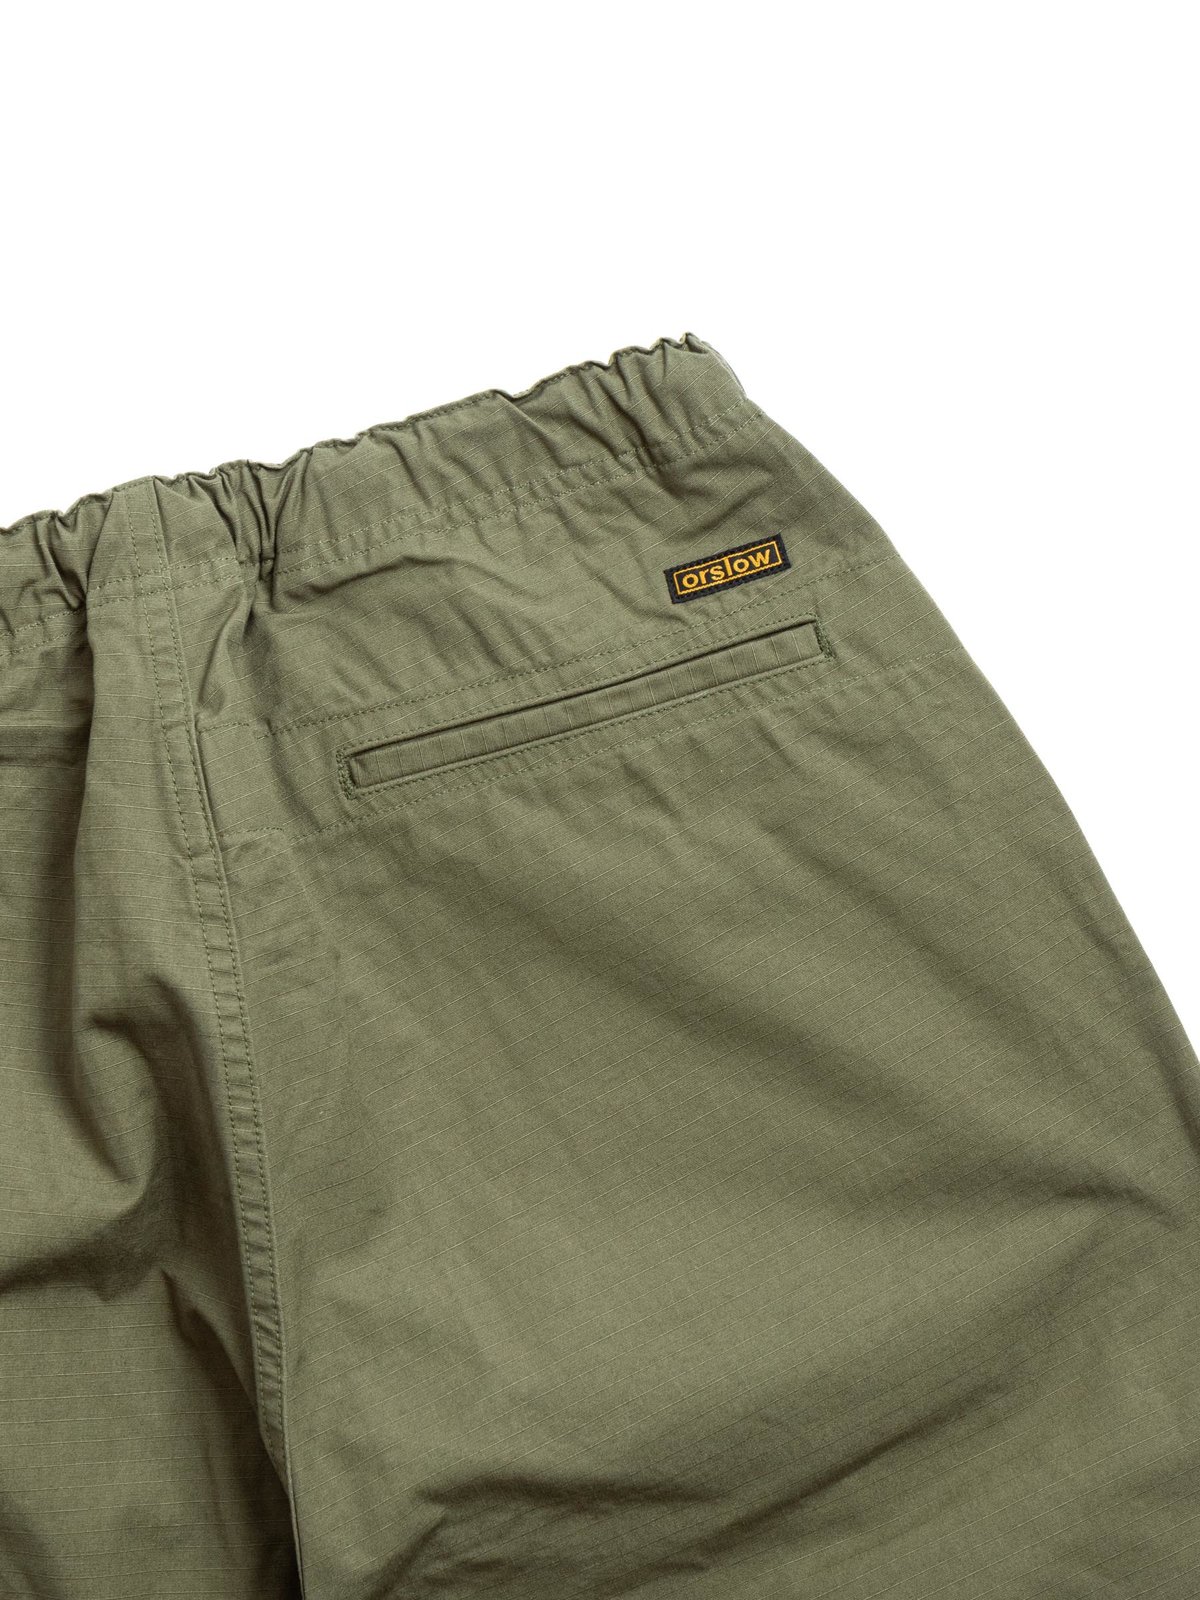 NEW YORKER PANT ARMY RIPSTOP - Image 5